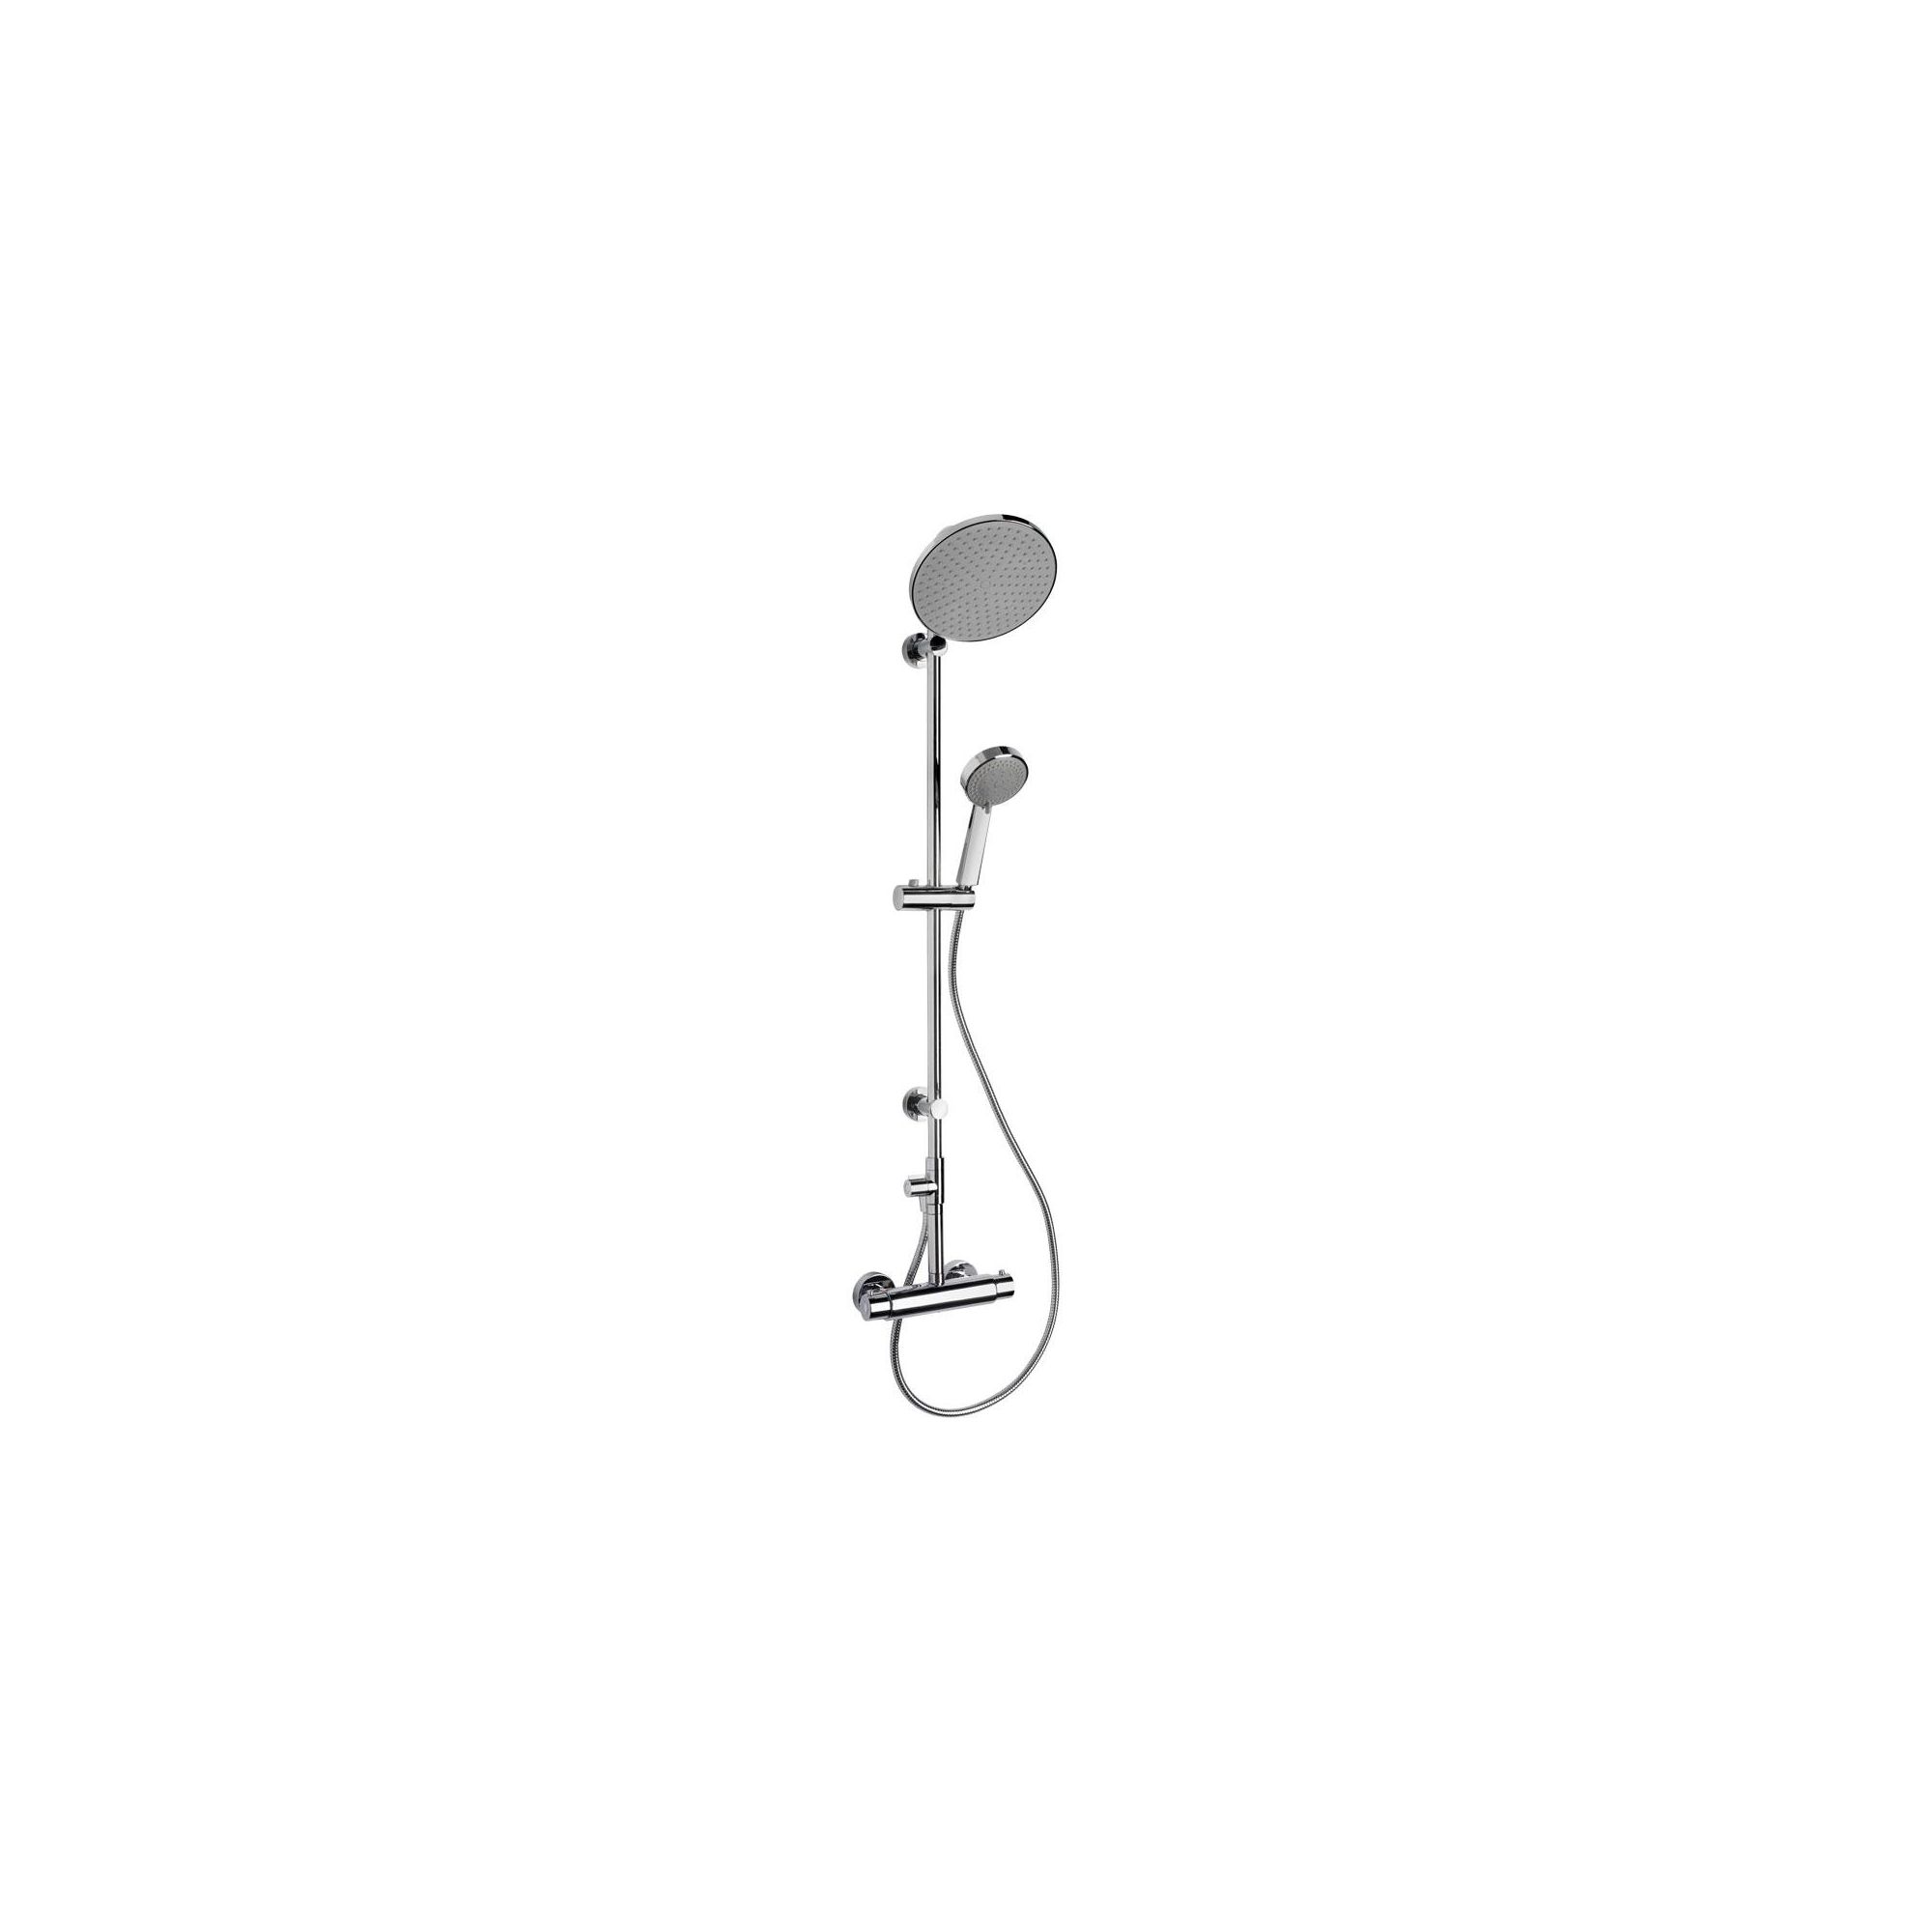 Croydex Florus Thermostatic Bar Shower Valve with Duo Shower Set at Tesco Direct